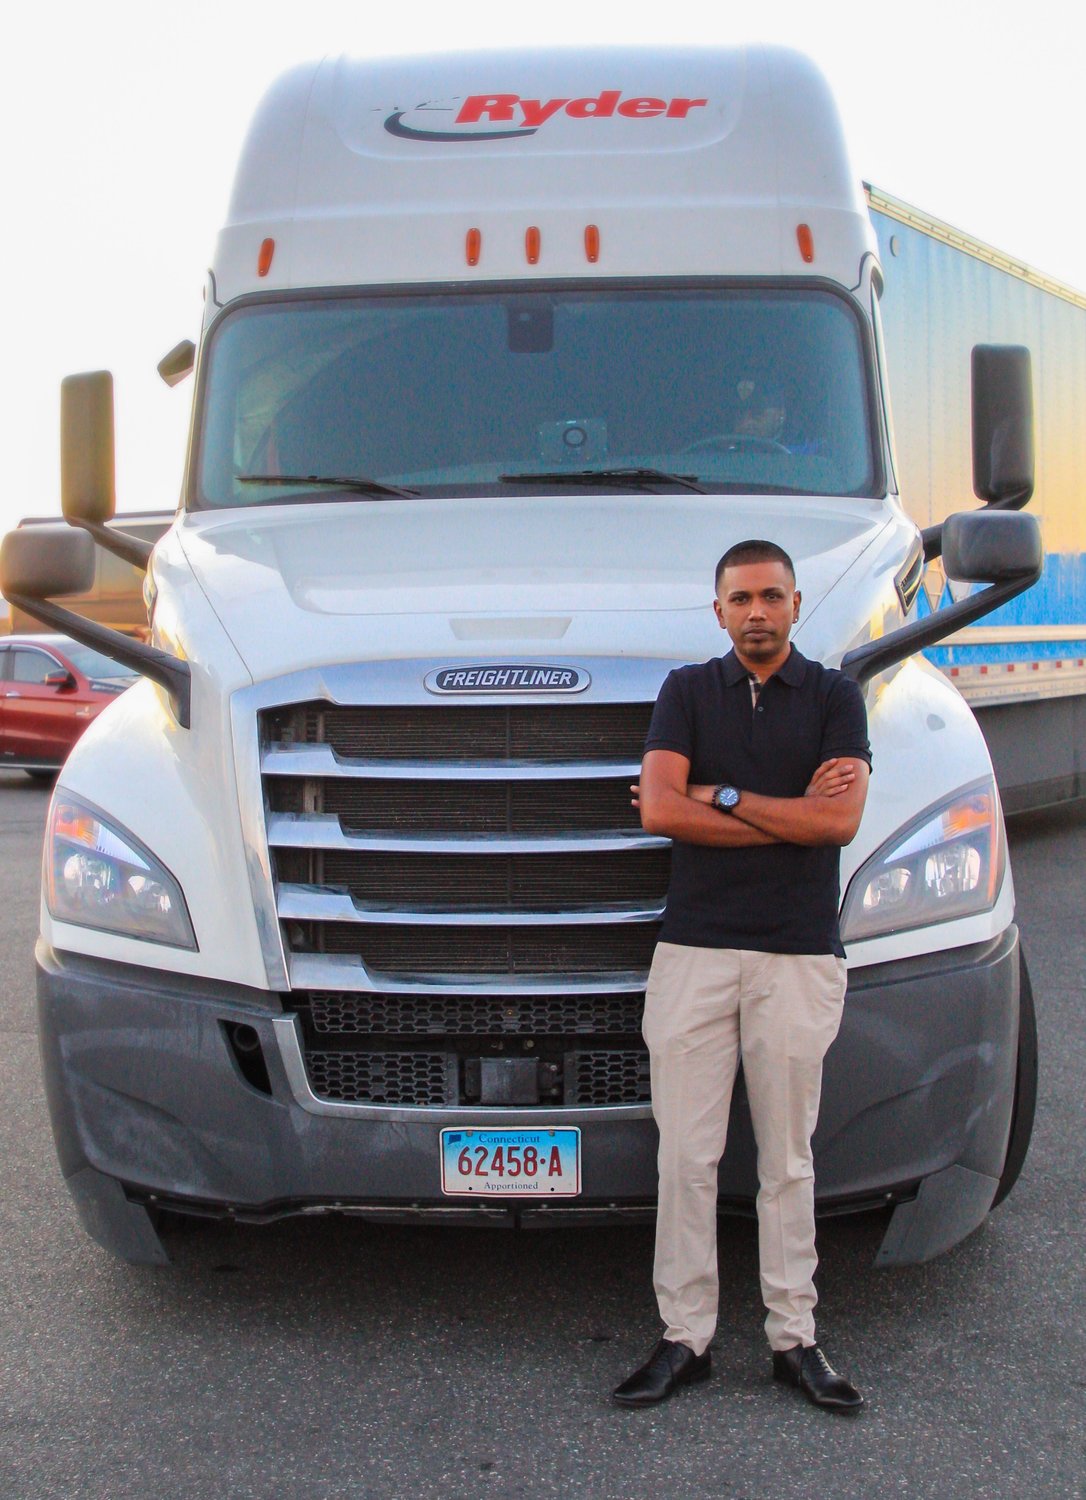 Ken Deocharran started his company with a minivan, and now has contracts with Ryder to lease trucks that deliver packages for Amazon.